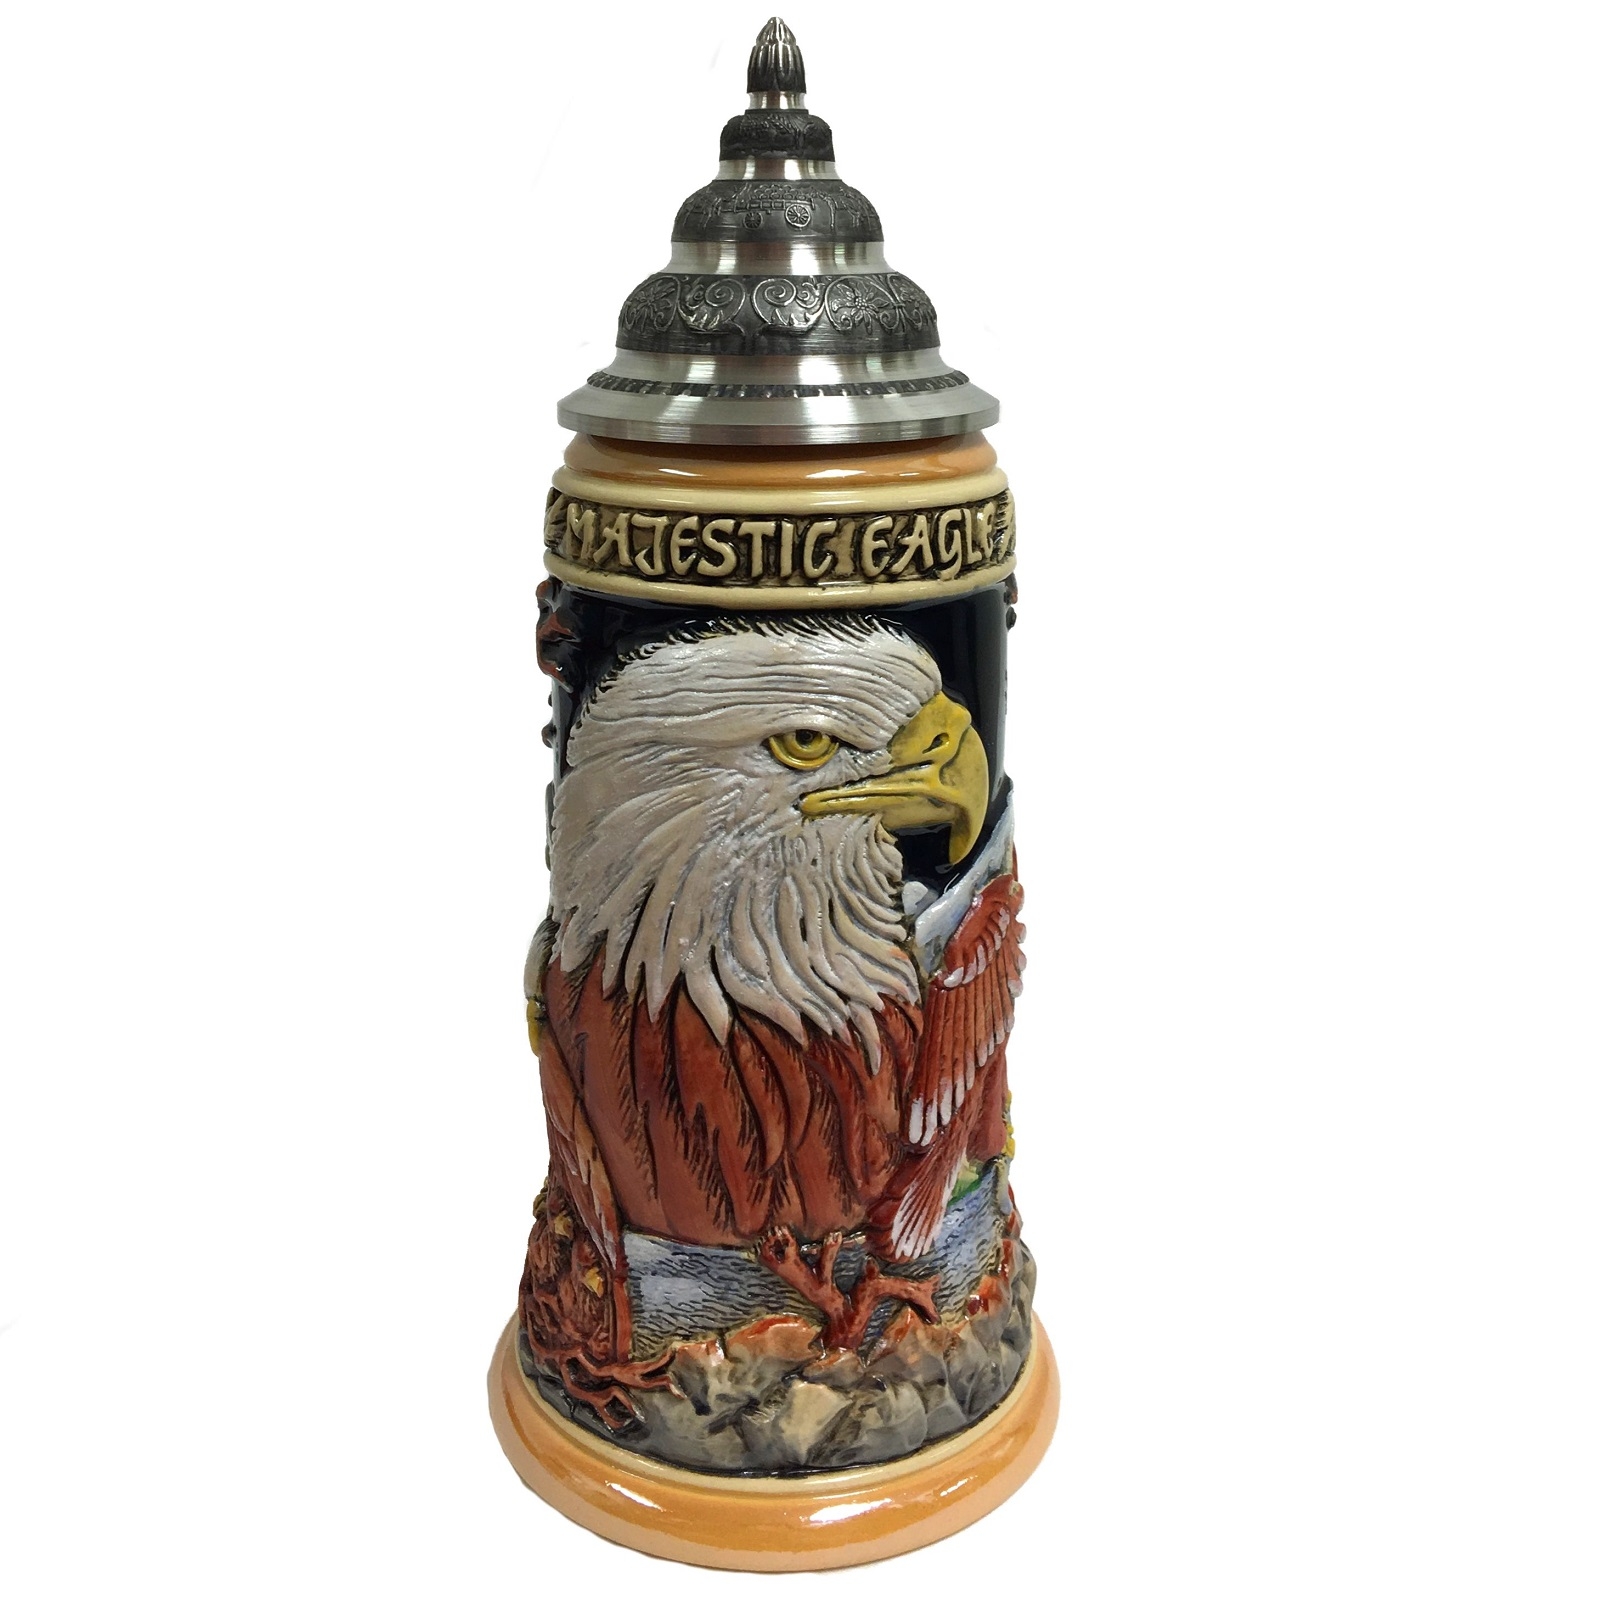 Majestic Bald Eagles LE German Stoneware Beer Stein .75 L Made in Germany